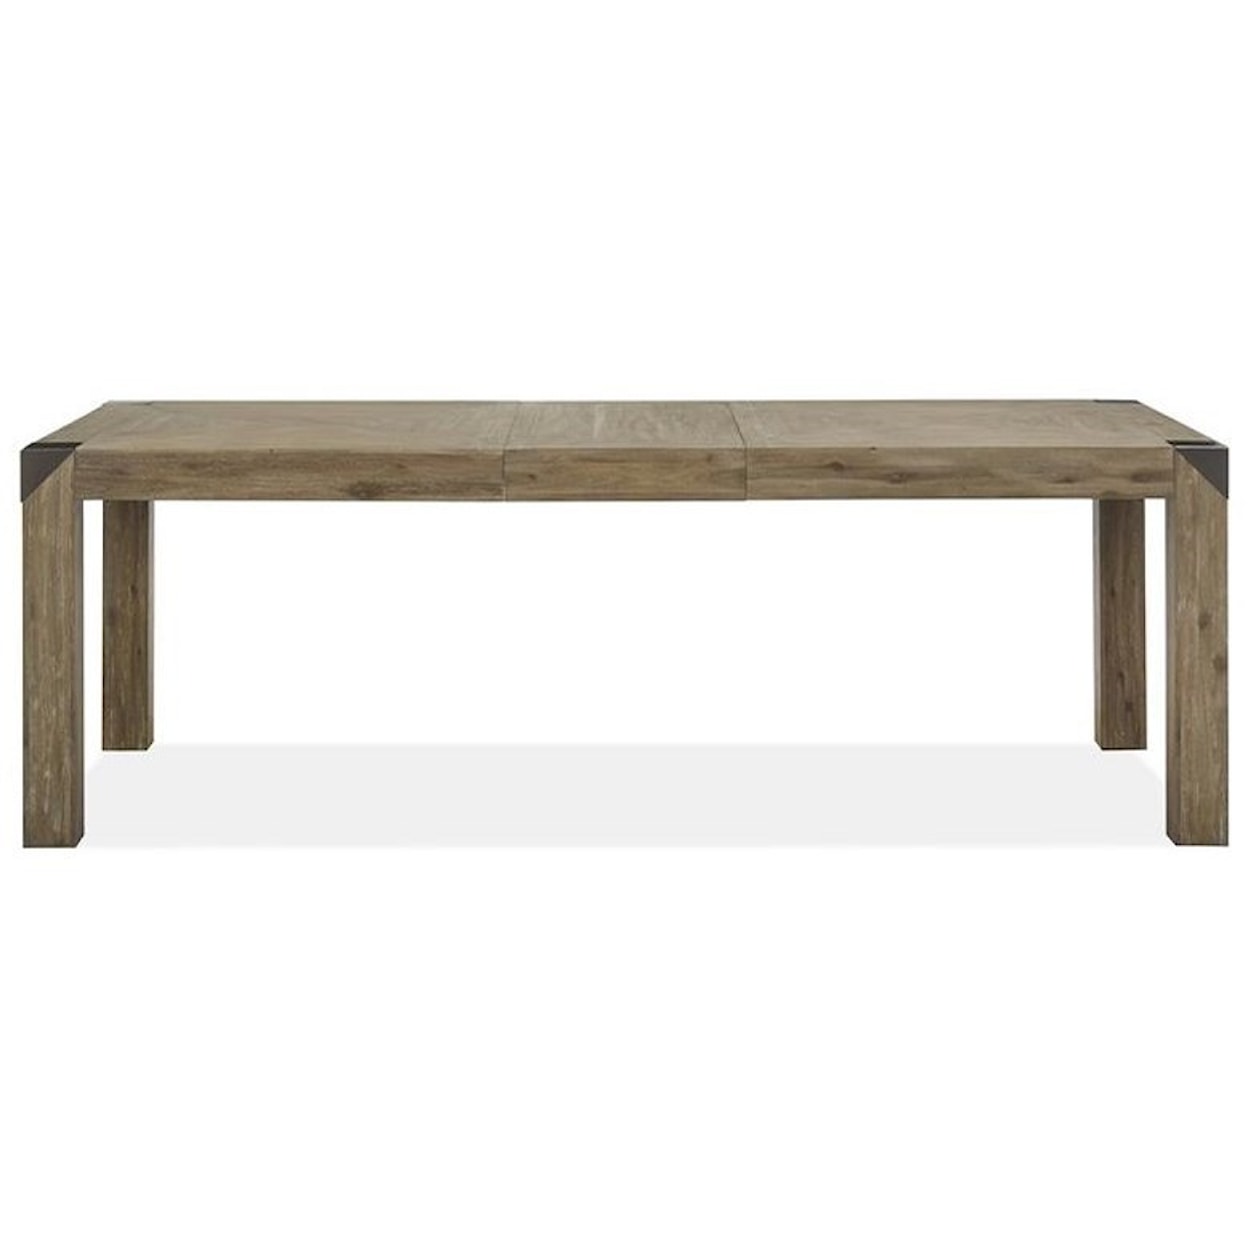 Magnussen Home Ainsley Dining Formal Dining Table